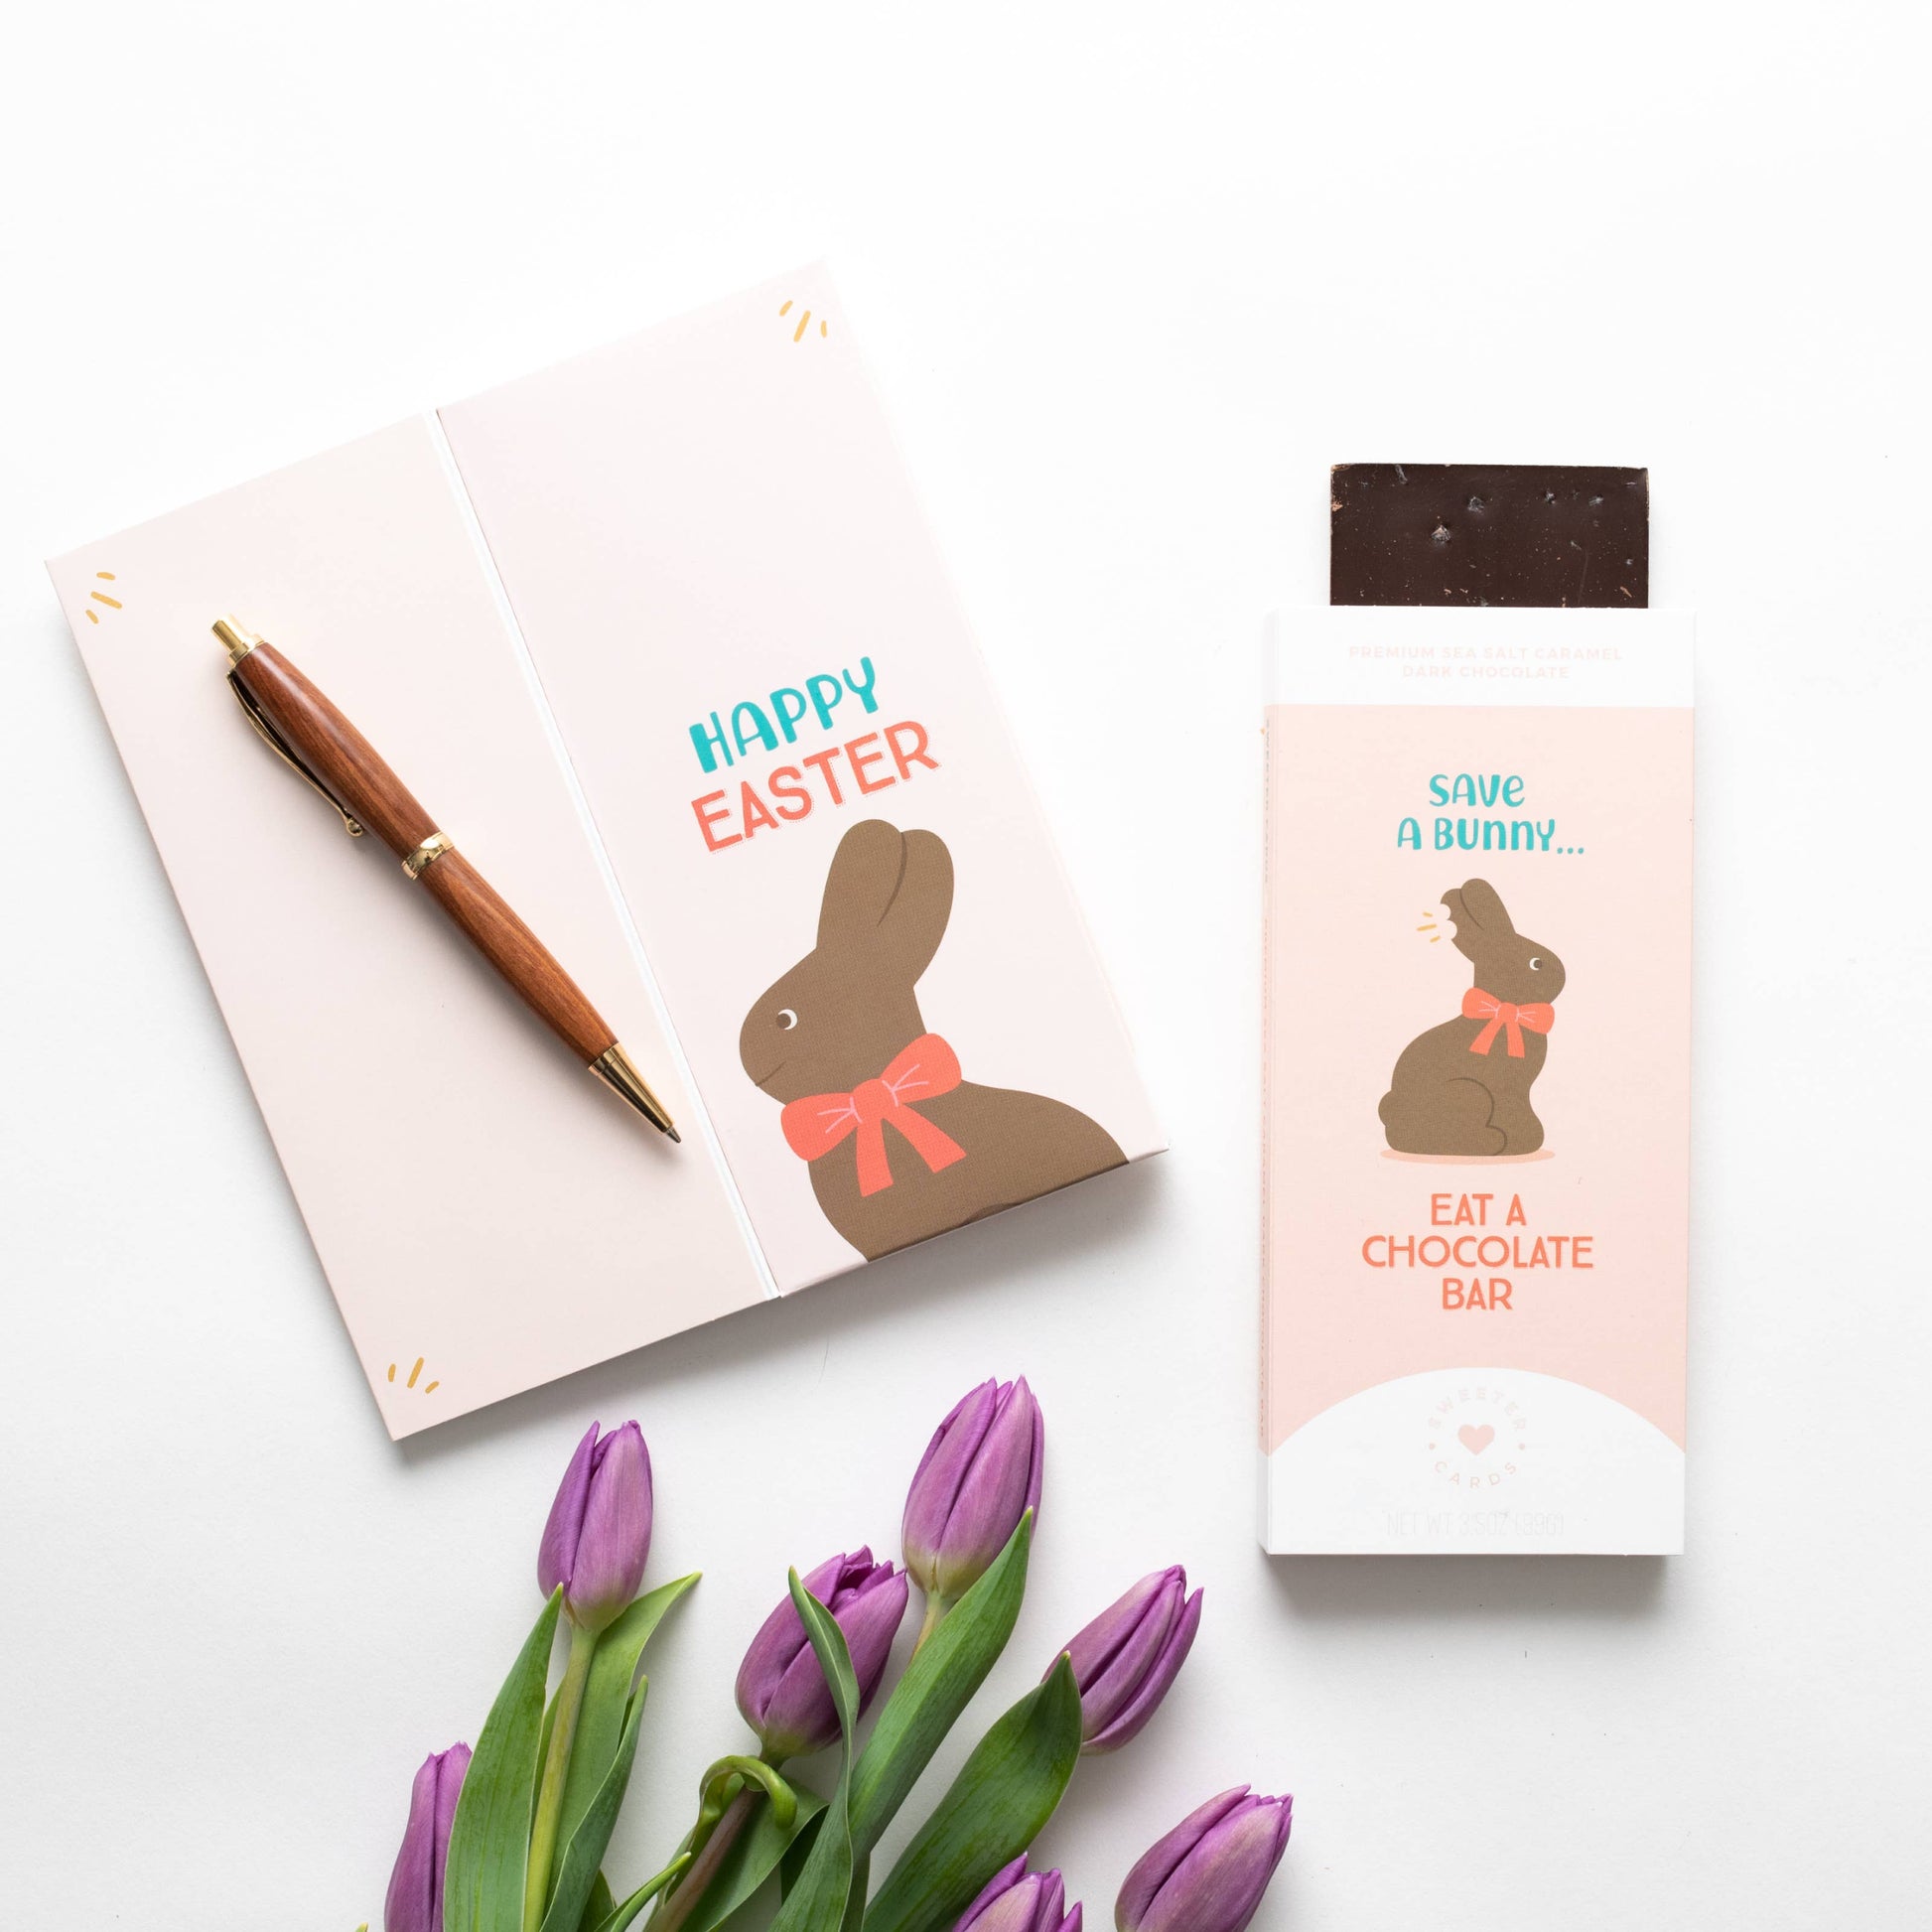 Sweeter Card - Chocolate Bar + Greeting Card in ONE! - Save a Bunny!  Sweeter Cards Chocolate Bar + Greeting Card in ONE!   -better made easy-eco-friendly-sustainable-gifting